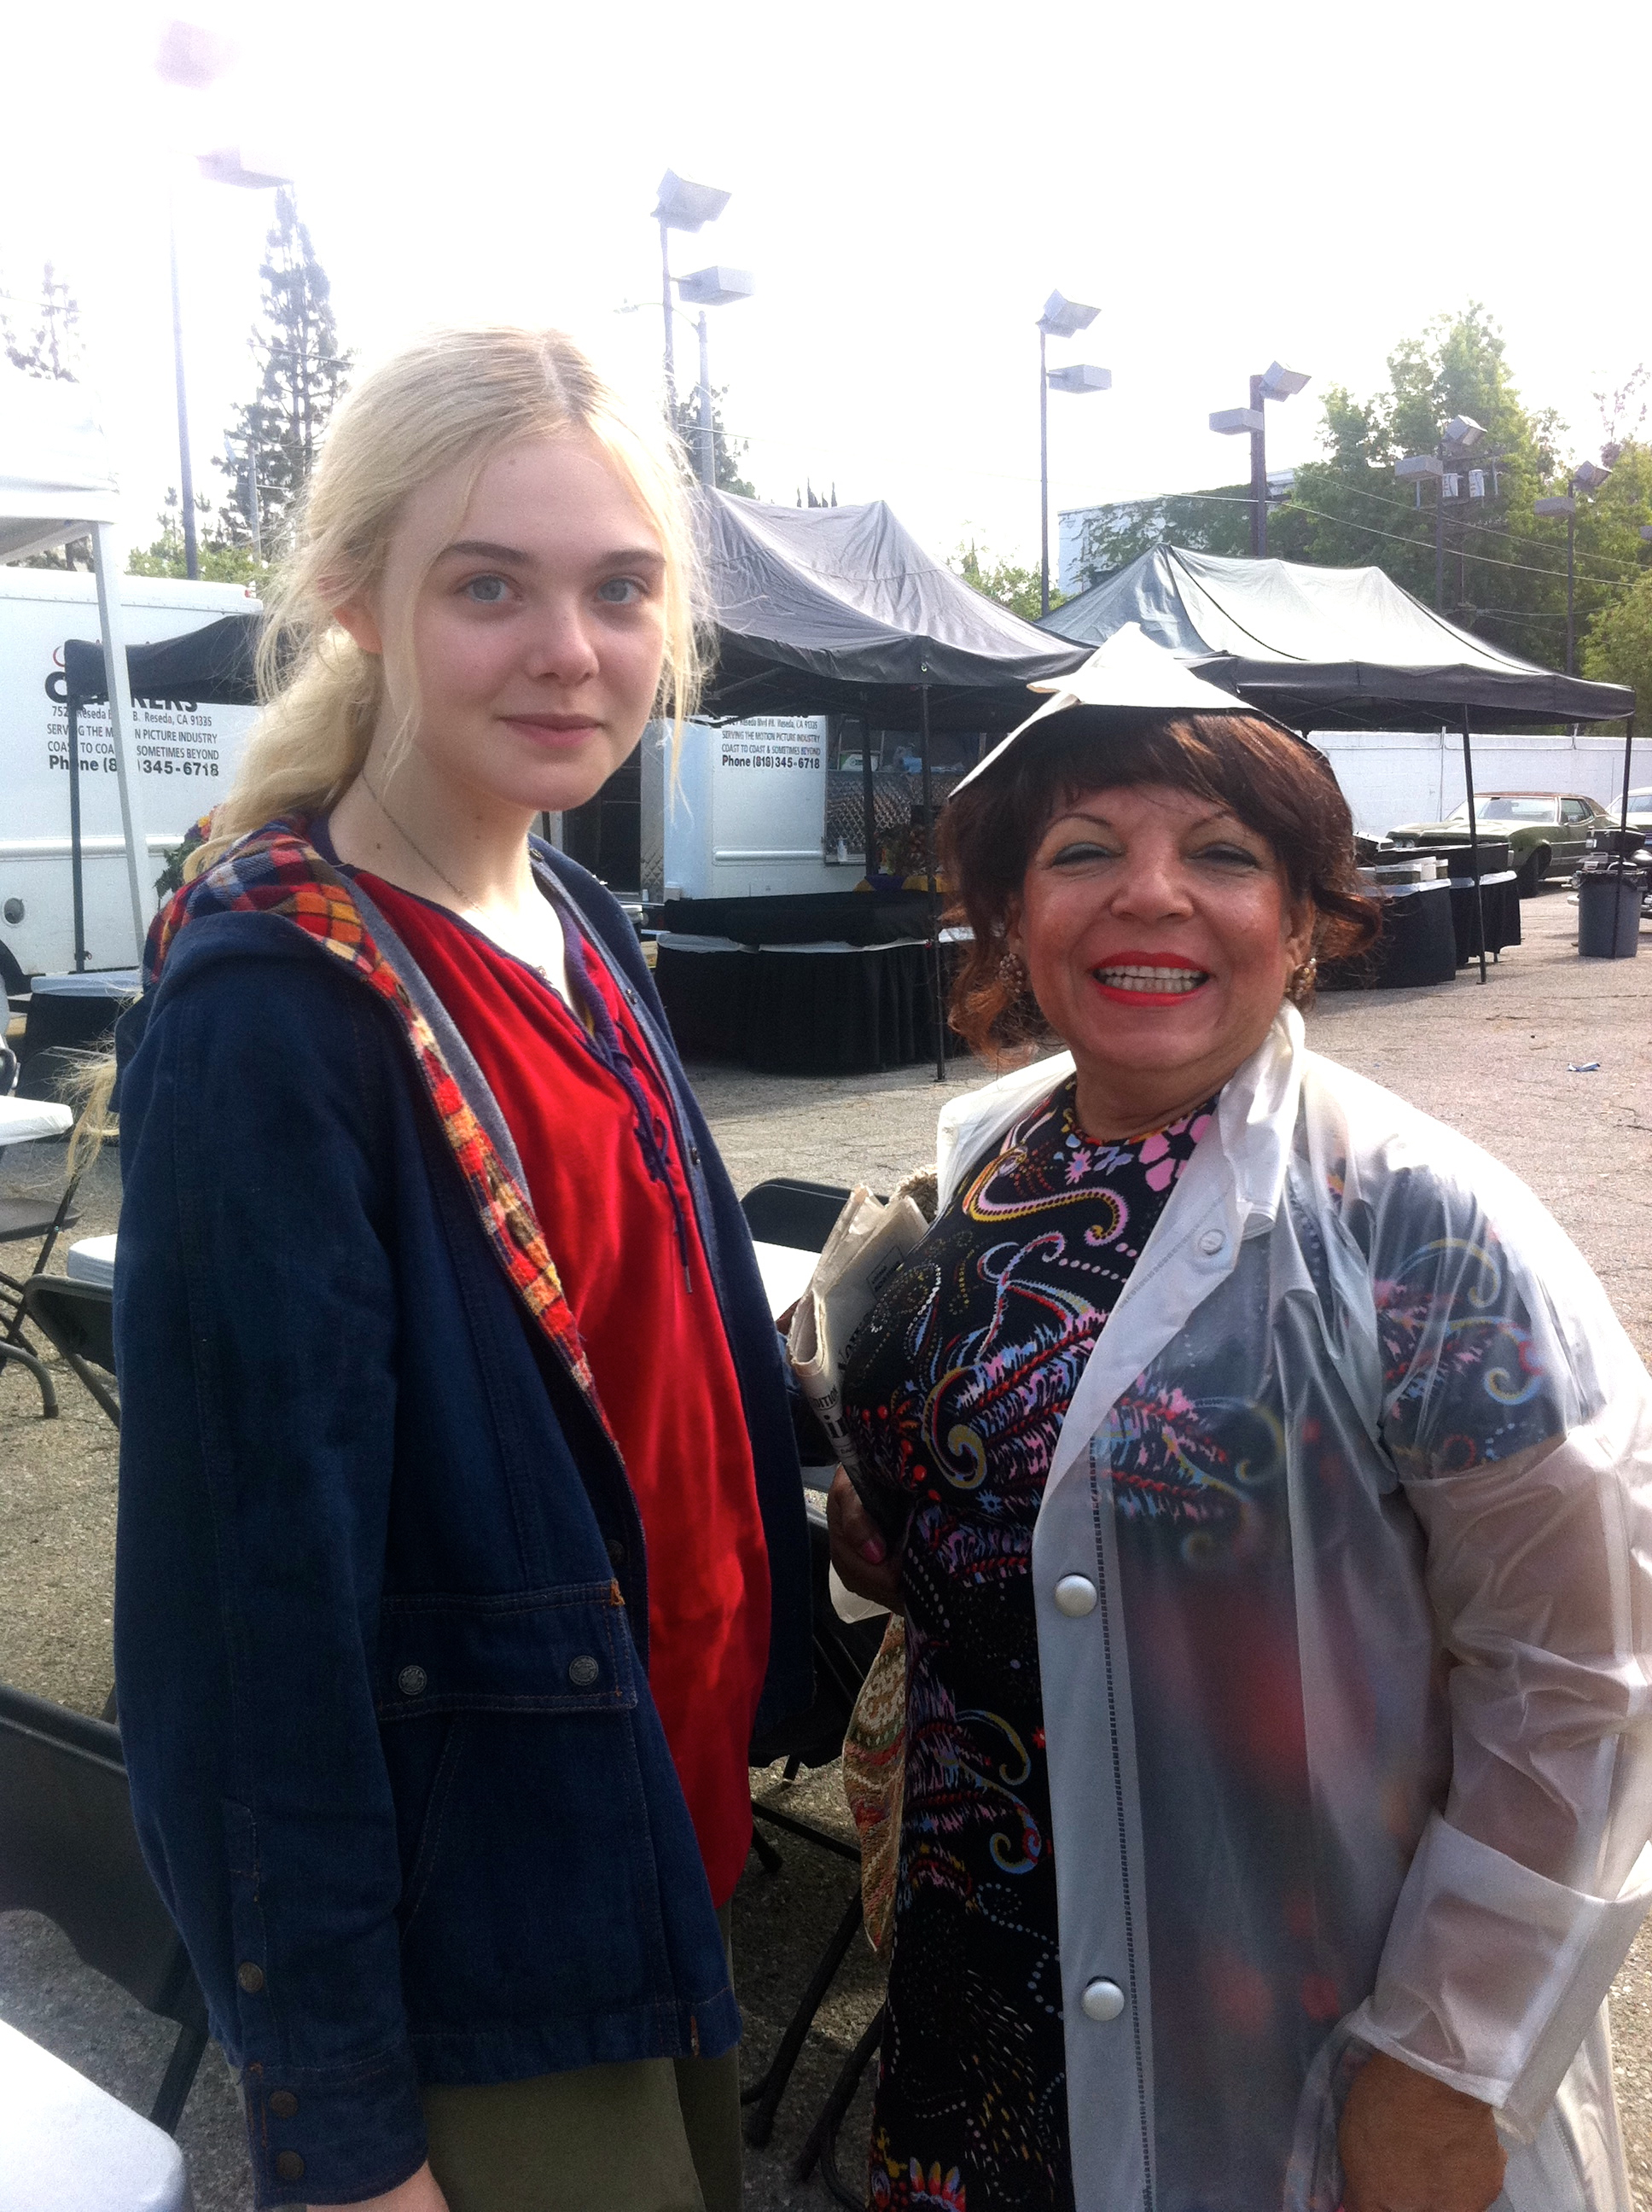 With actress Elle Fanning, in the movie 